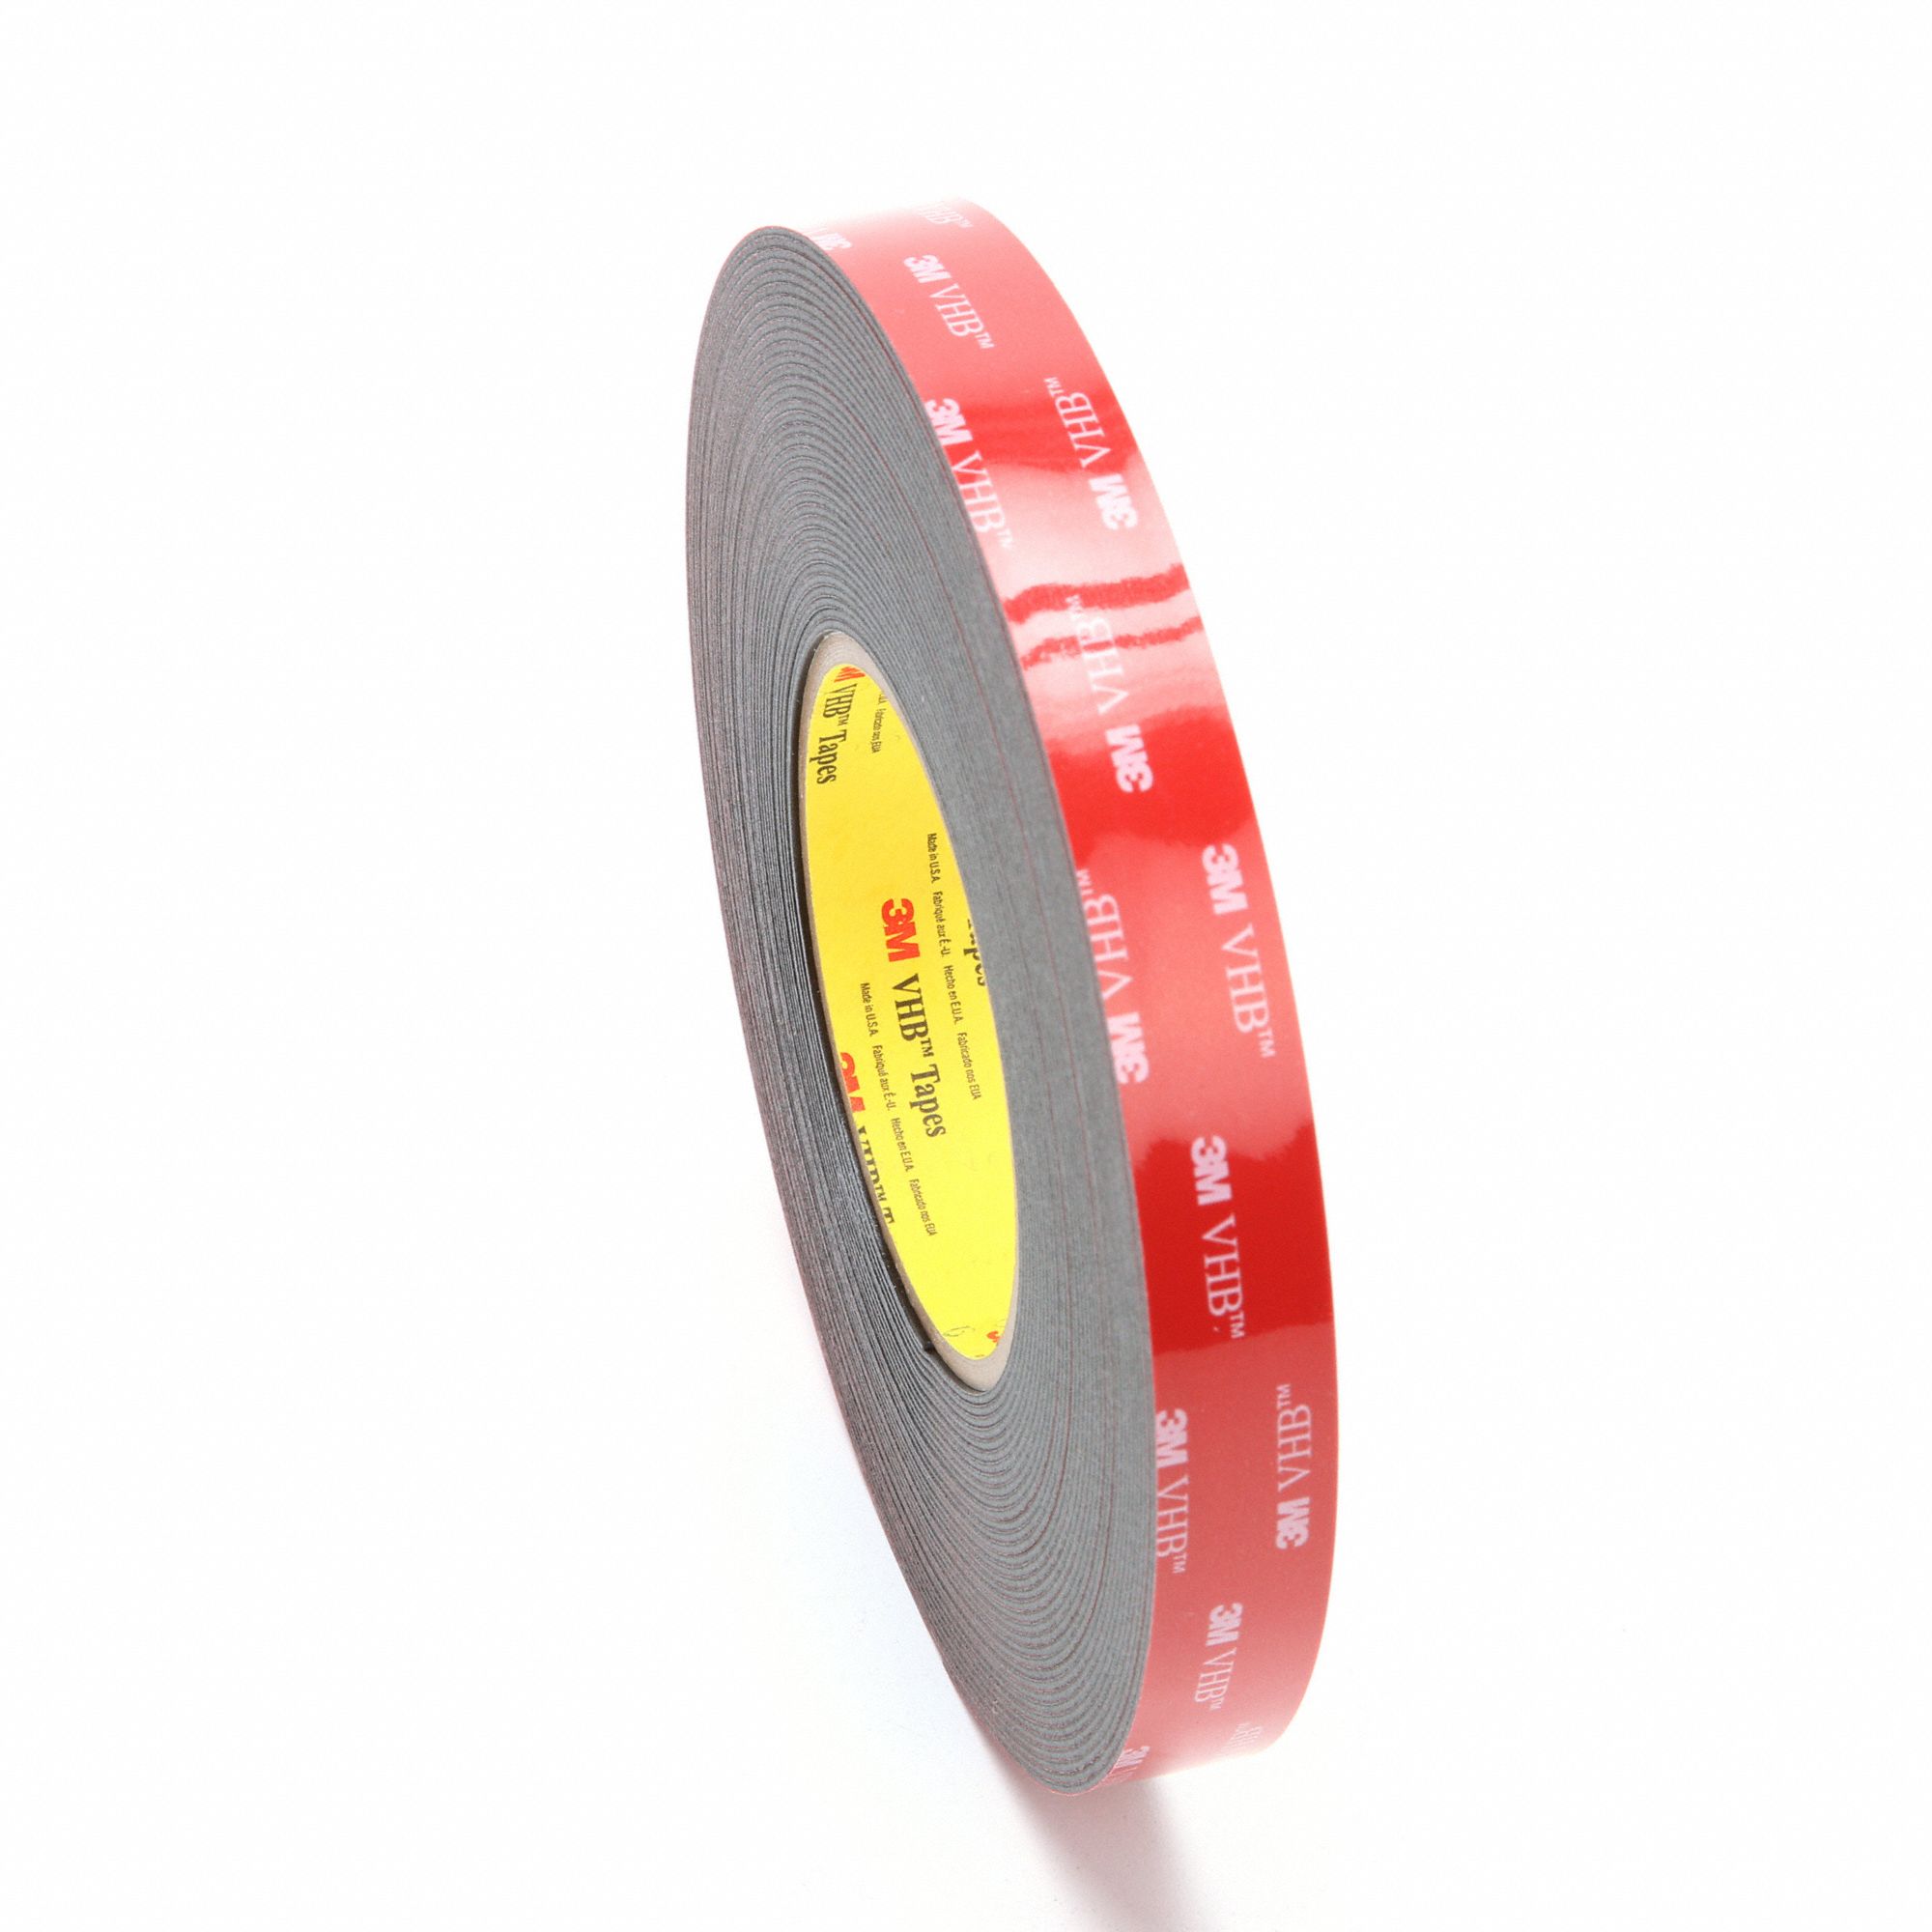 3M Double Sided Mounting Tape, 3M5952 Heavy Duty VHB Foam Adhesive  1/2X15.4 FT